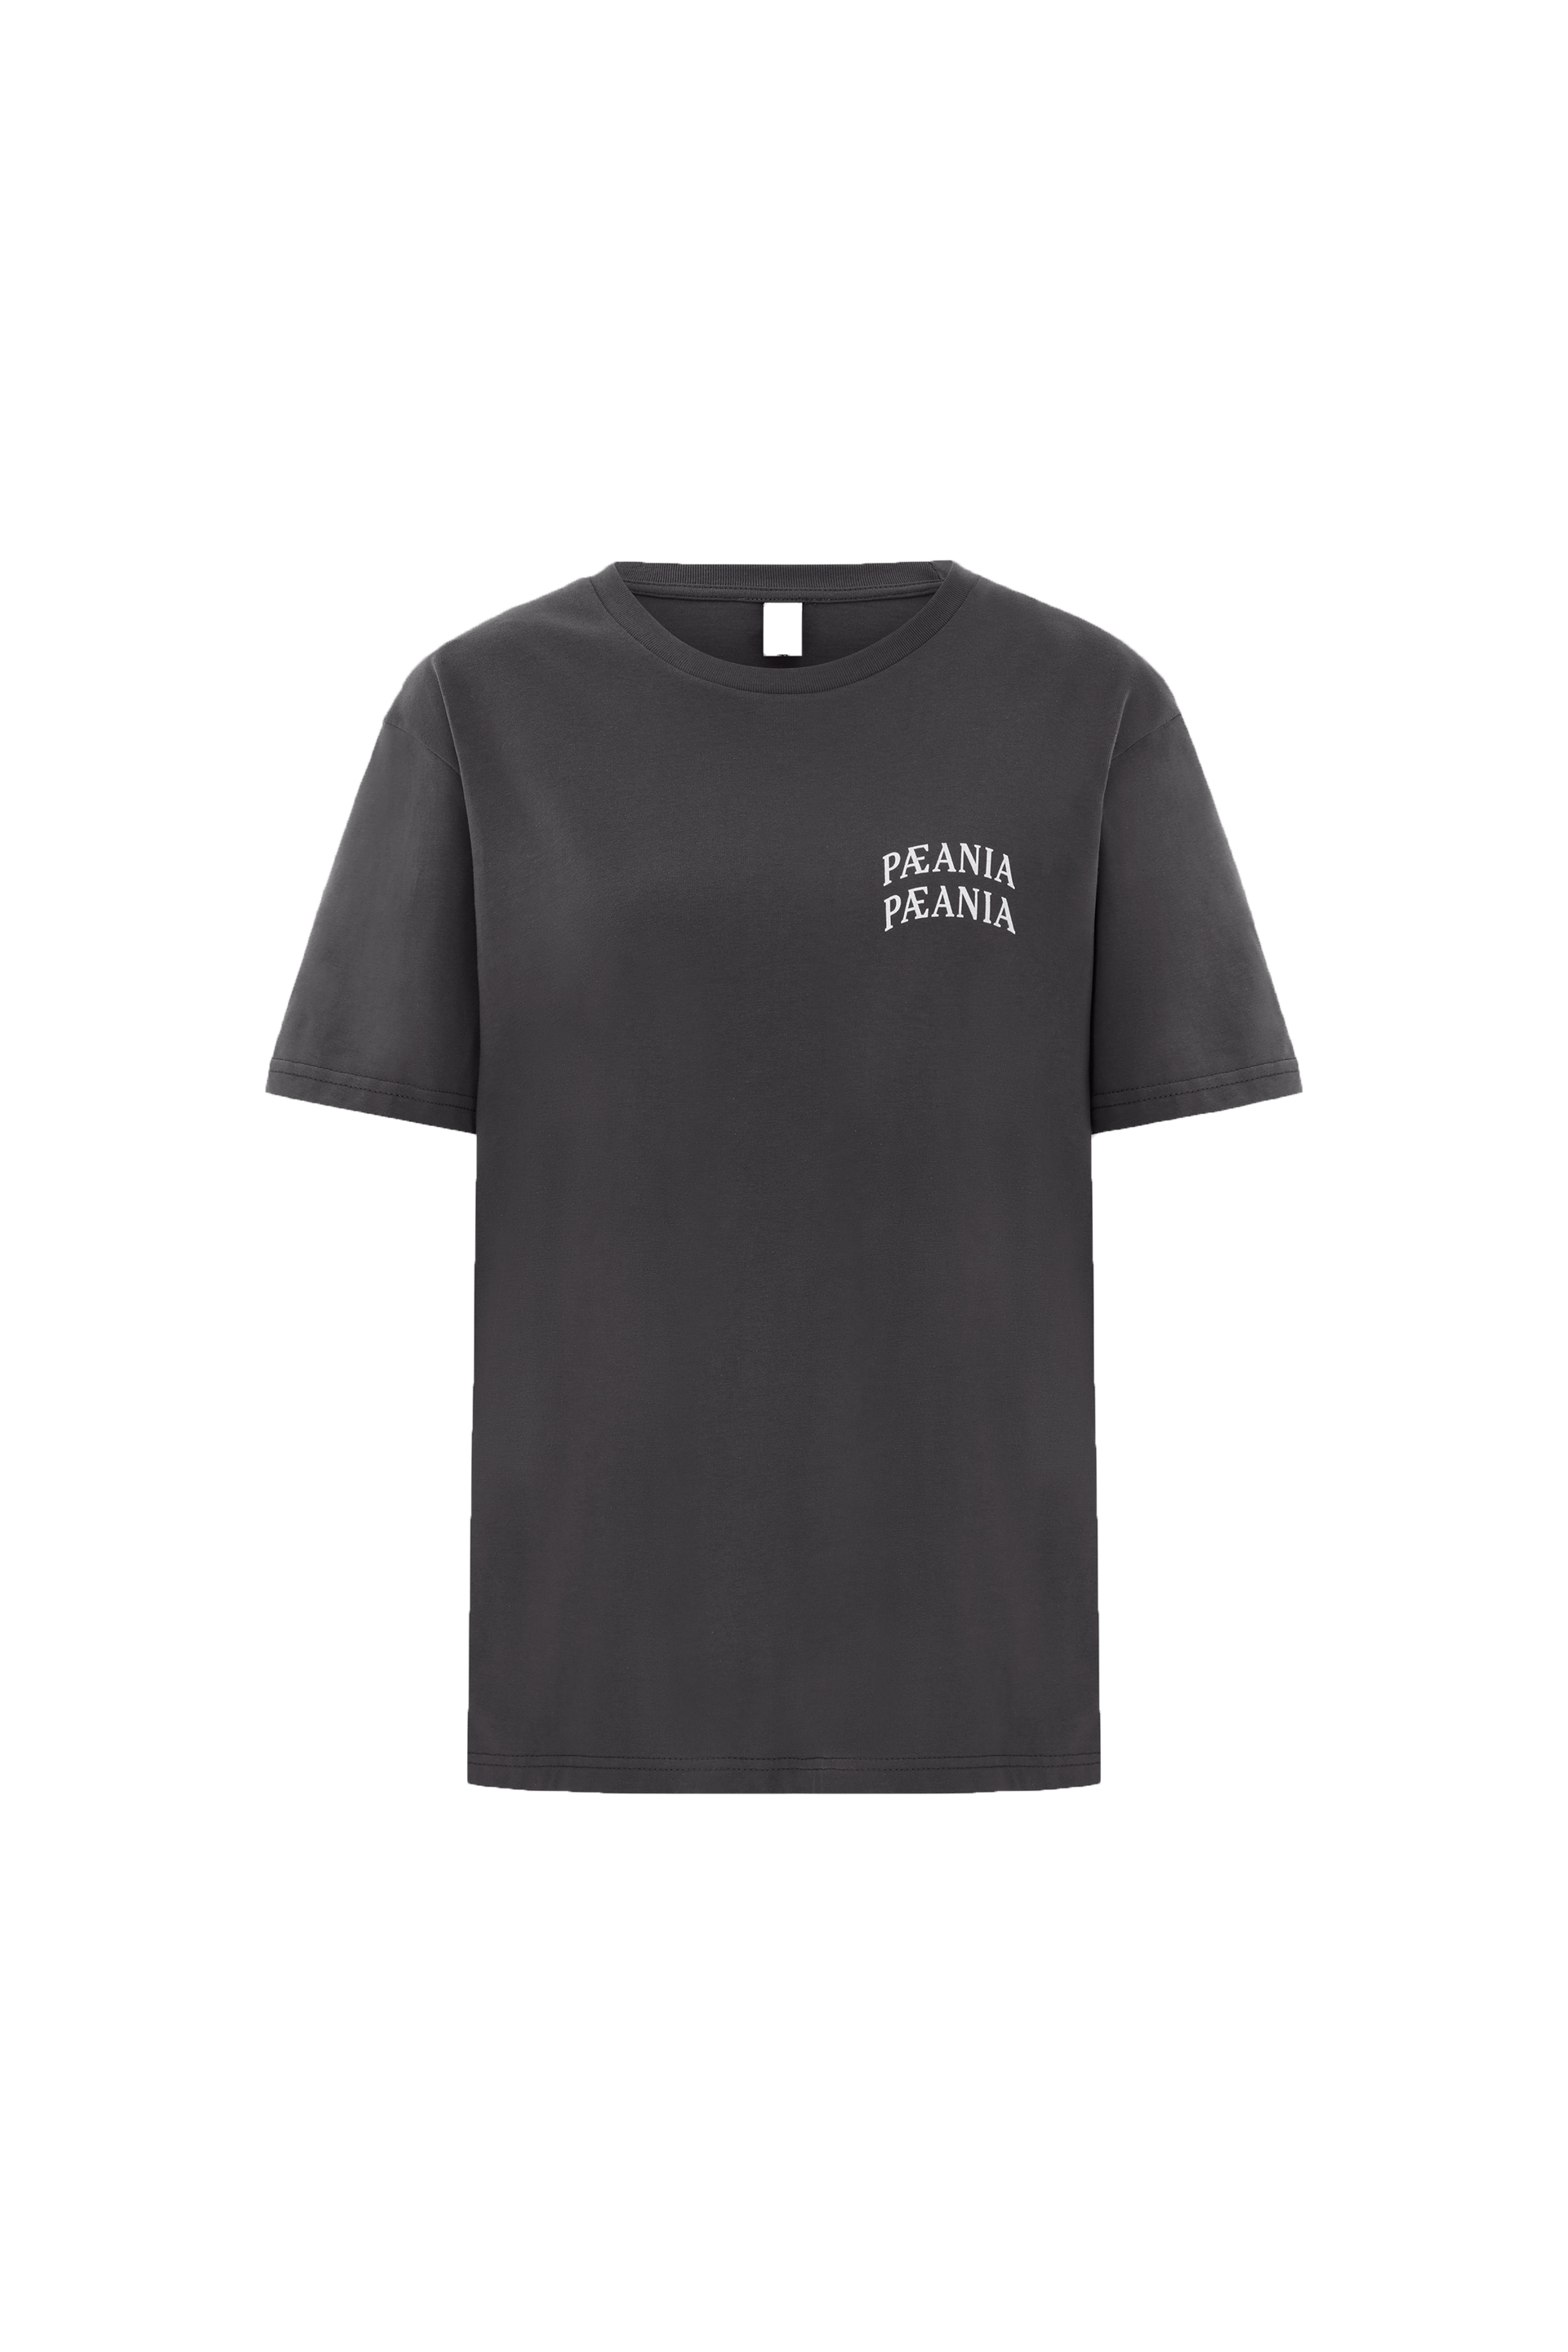 DION OF PAEANIA - ESSENTIAL T-SHIRT